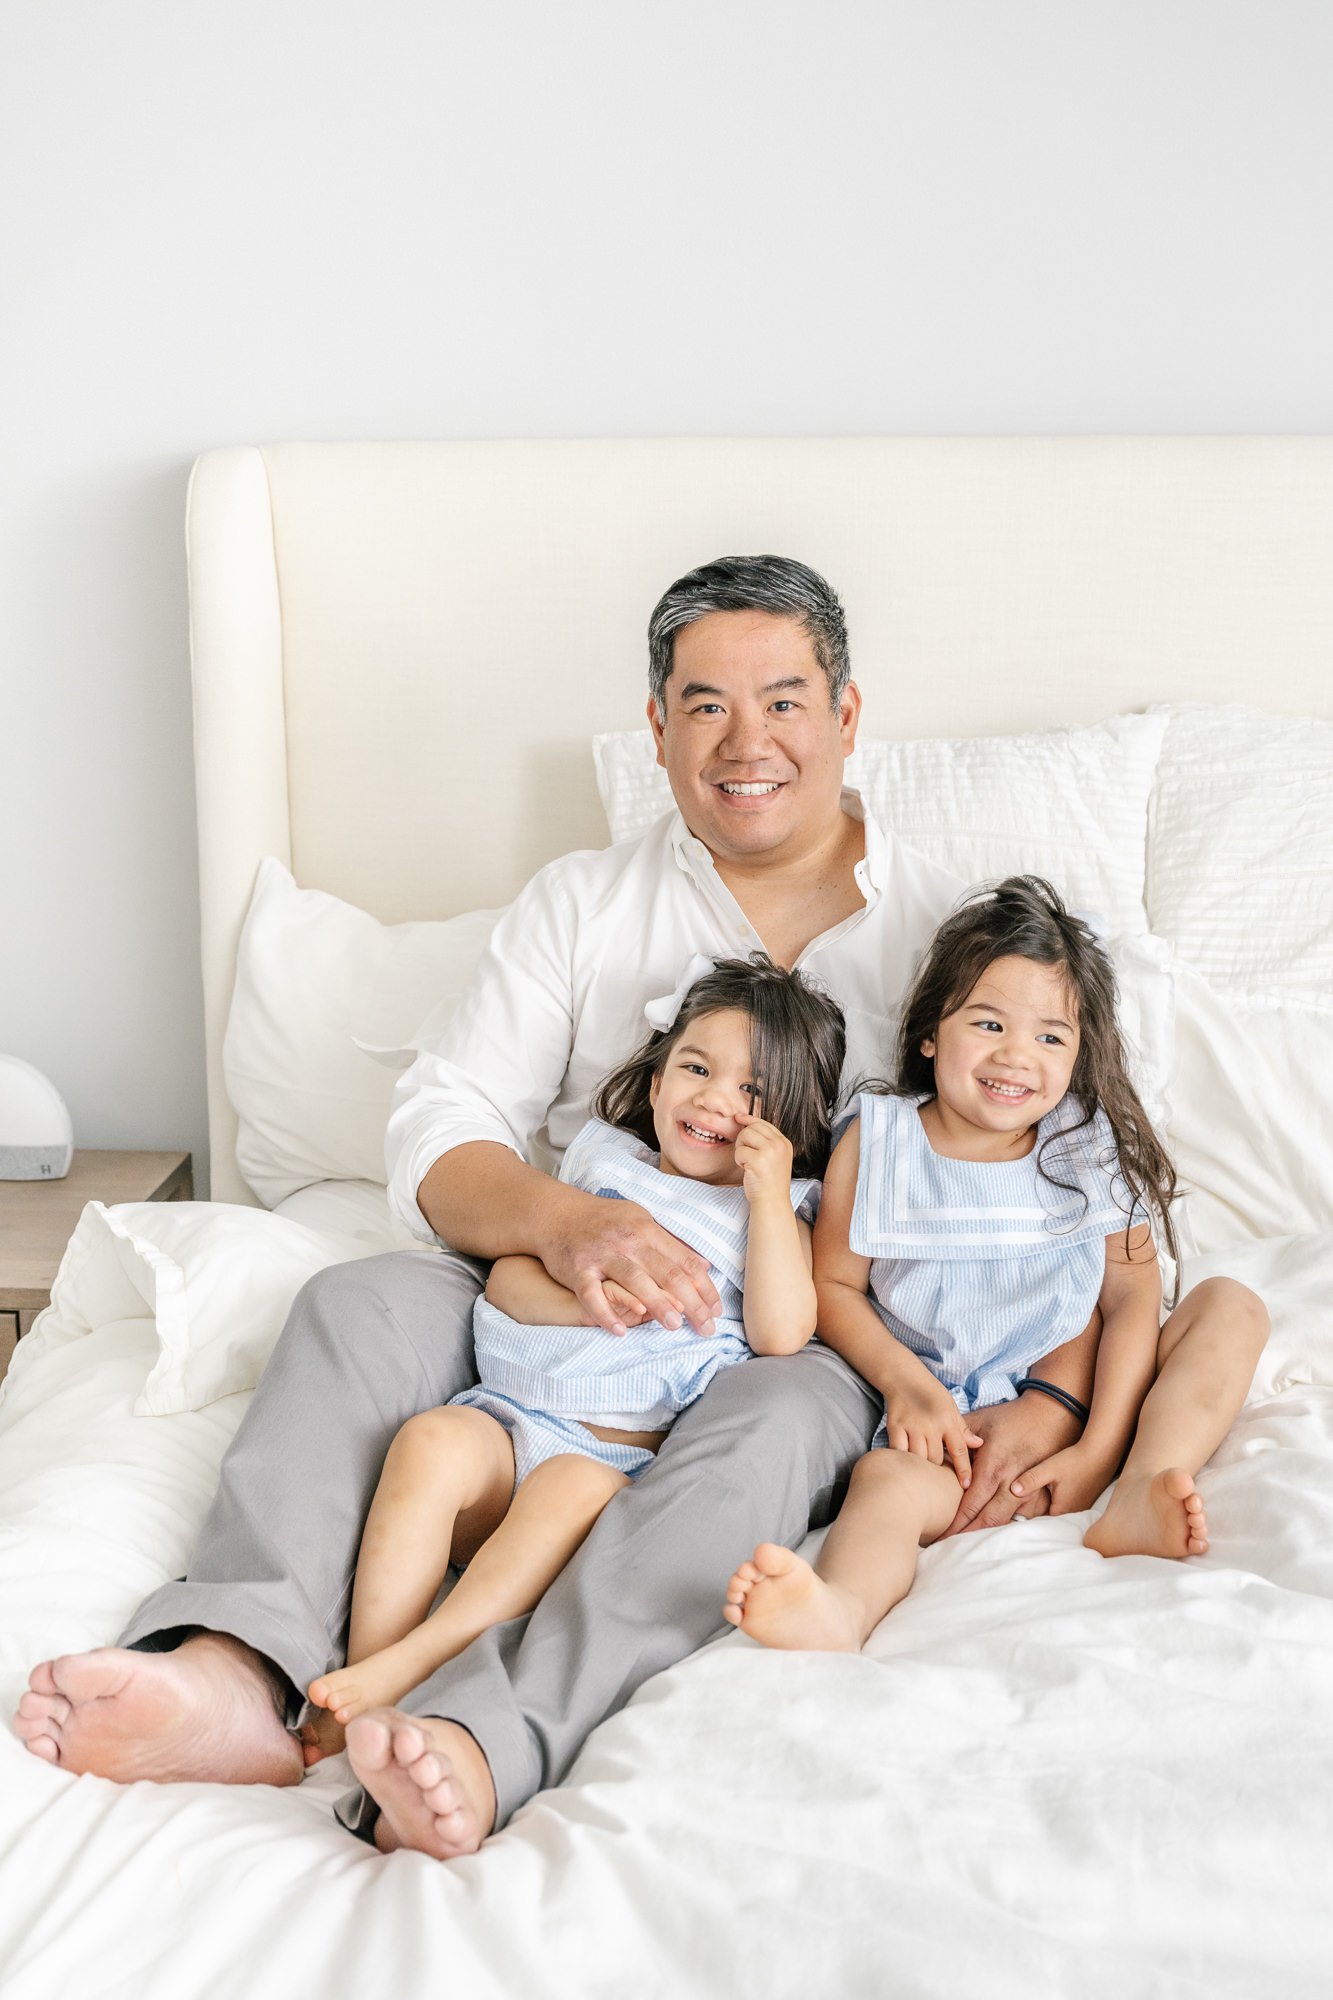  Cute pose idea of a father cuddling up with his two young daughters on the queen bed in their New Jersey home. #newyorkcityphotographer #familyportraits #newbornportraitsession #inhomephotography #familyoffive #familyposeinspo #newjerseyfamilyphotog